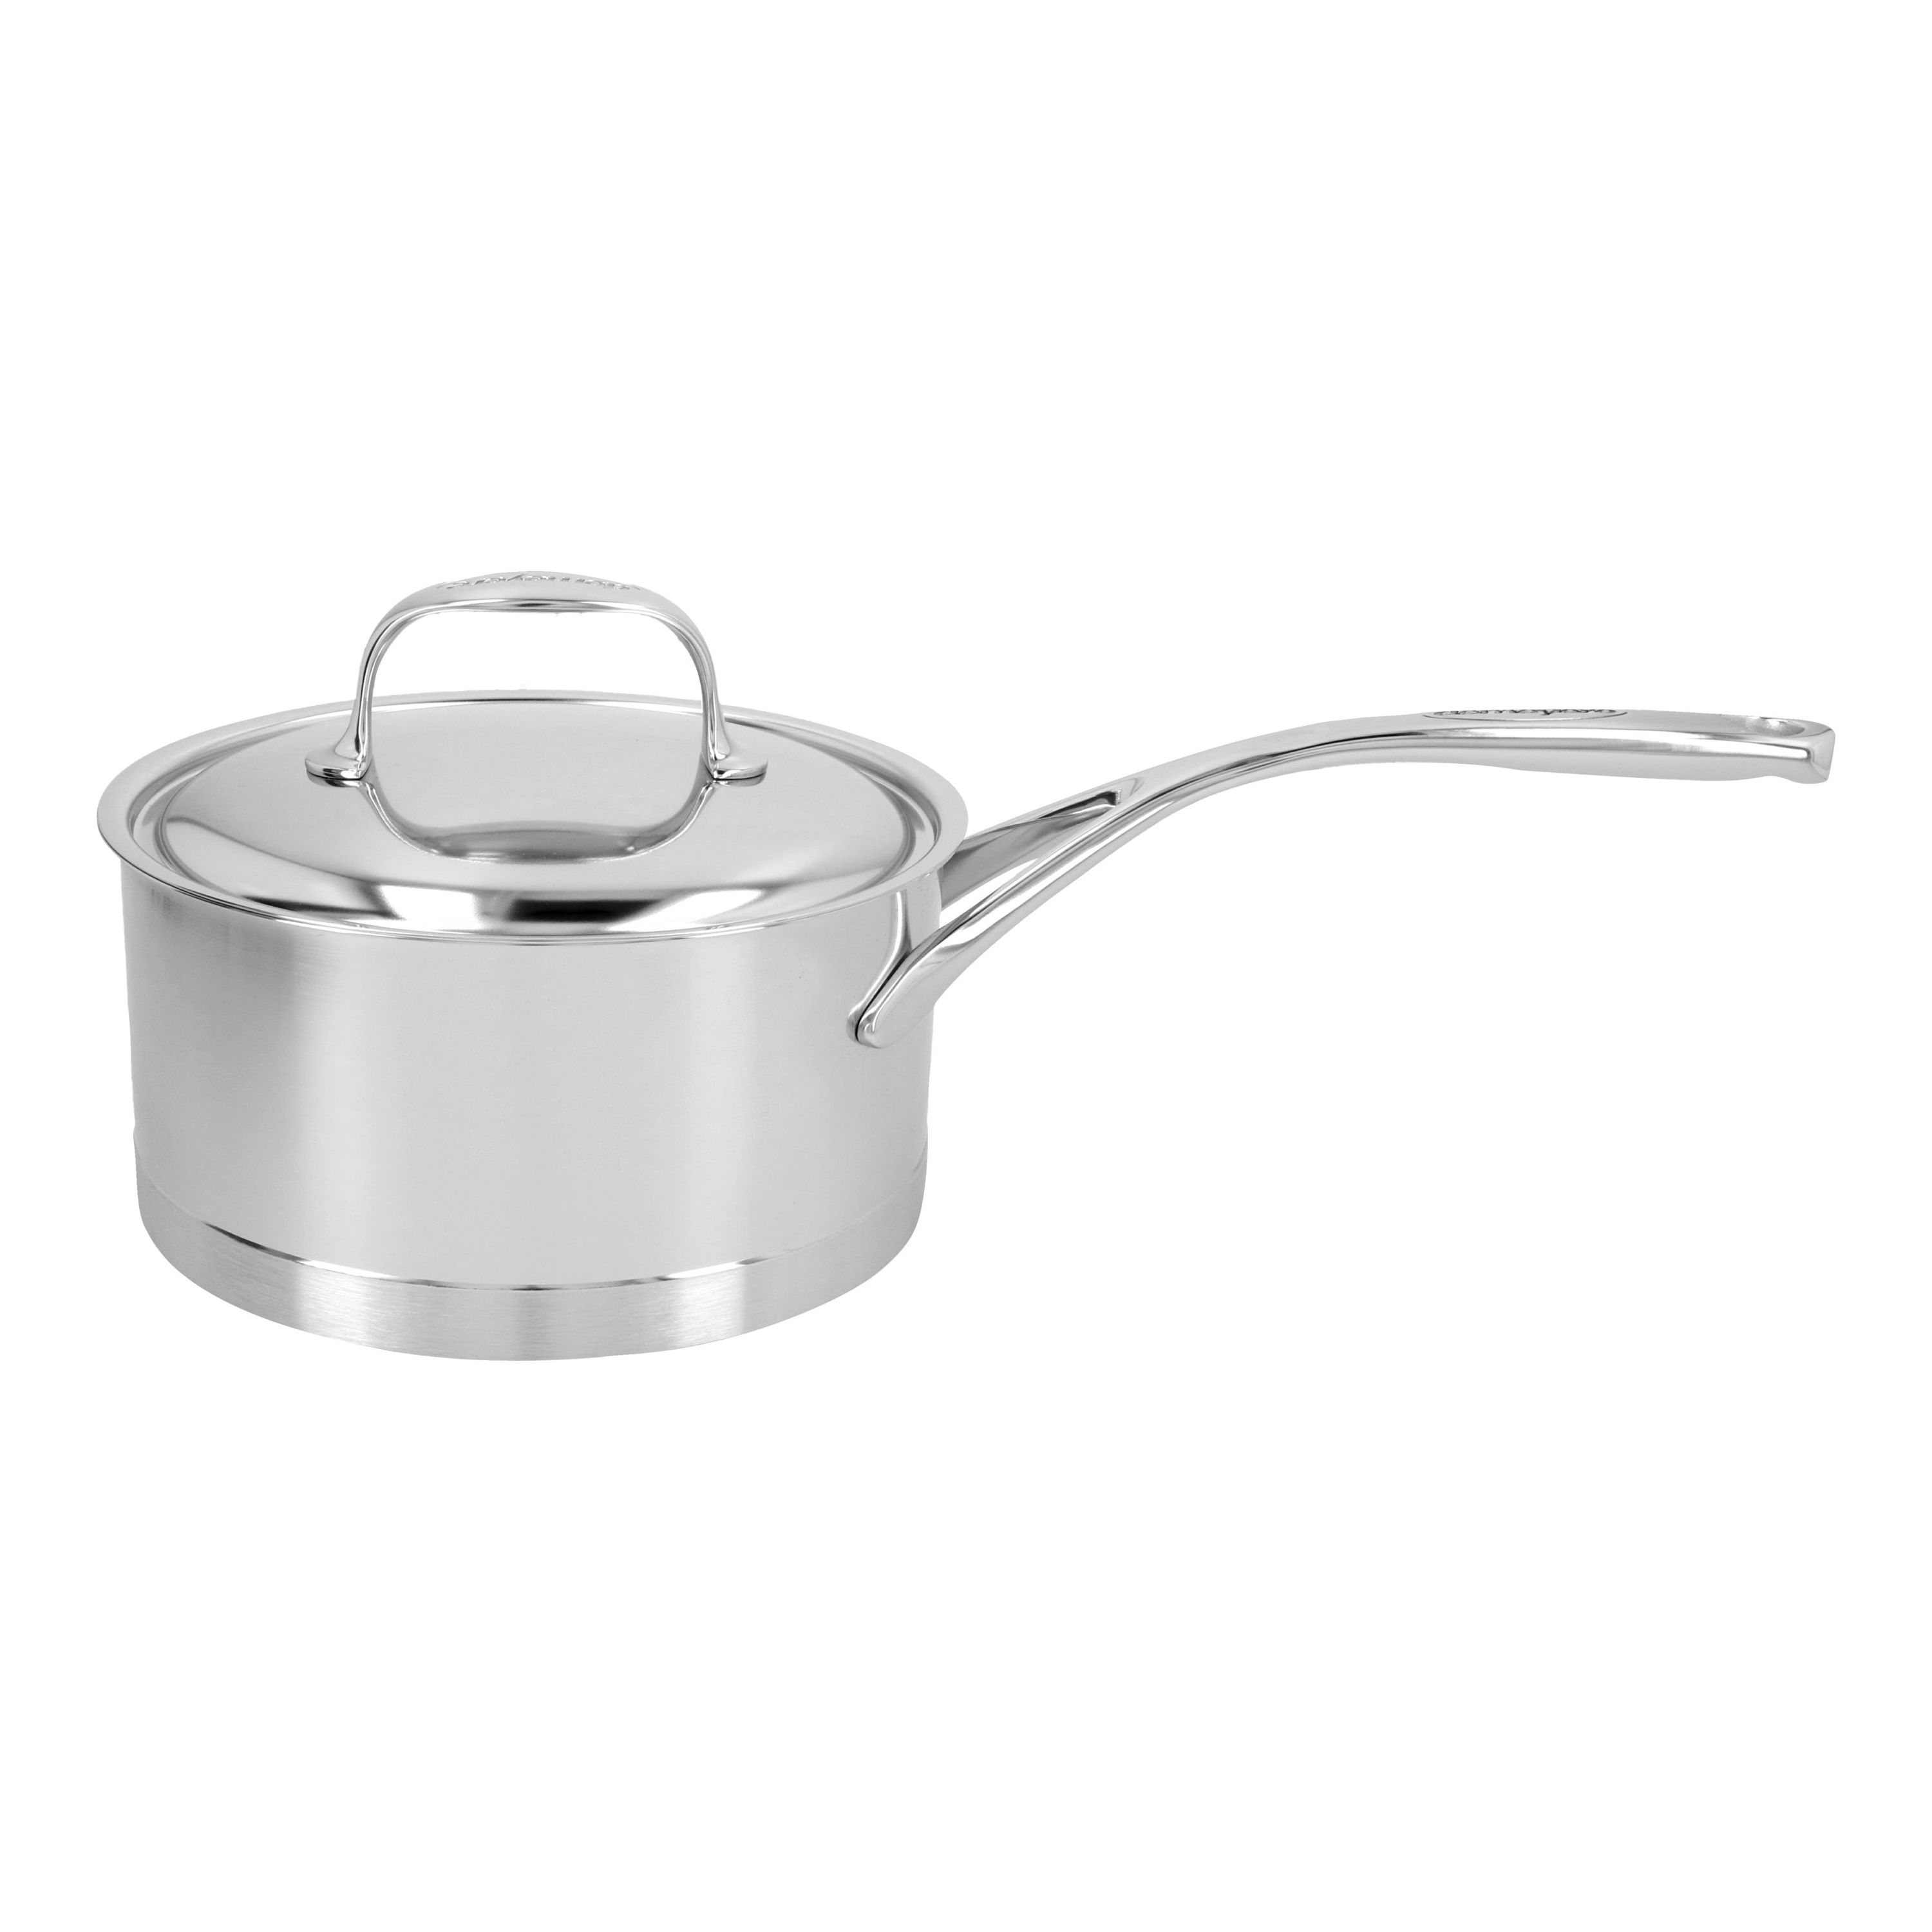 Cookware Set Stainless Steel Sauce Pan Extra Strength and Stay